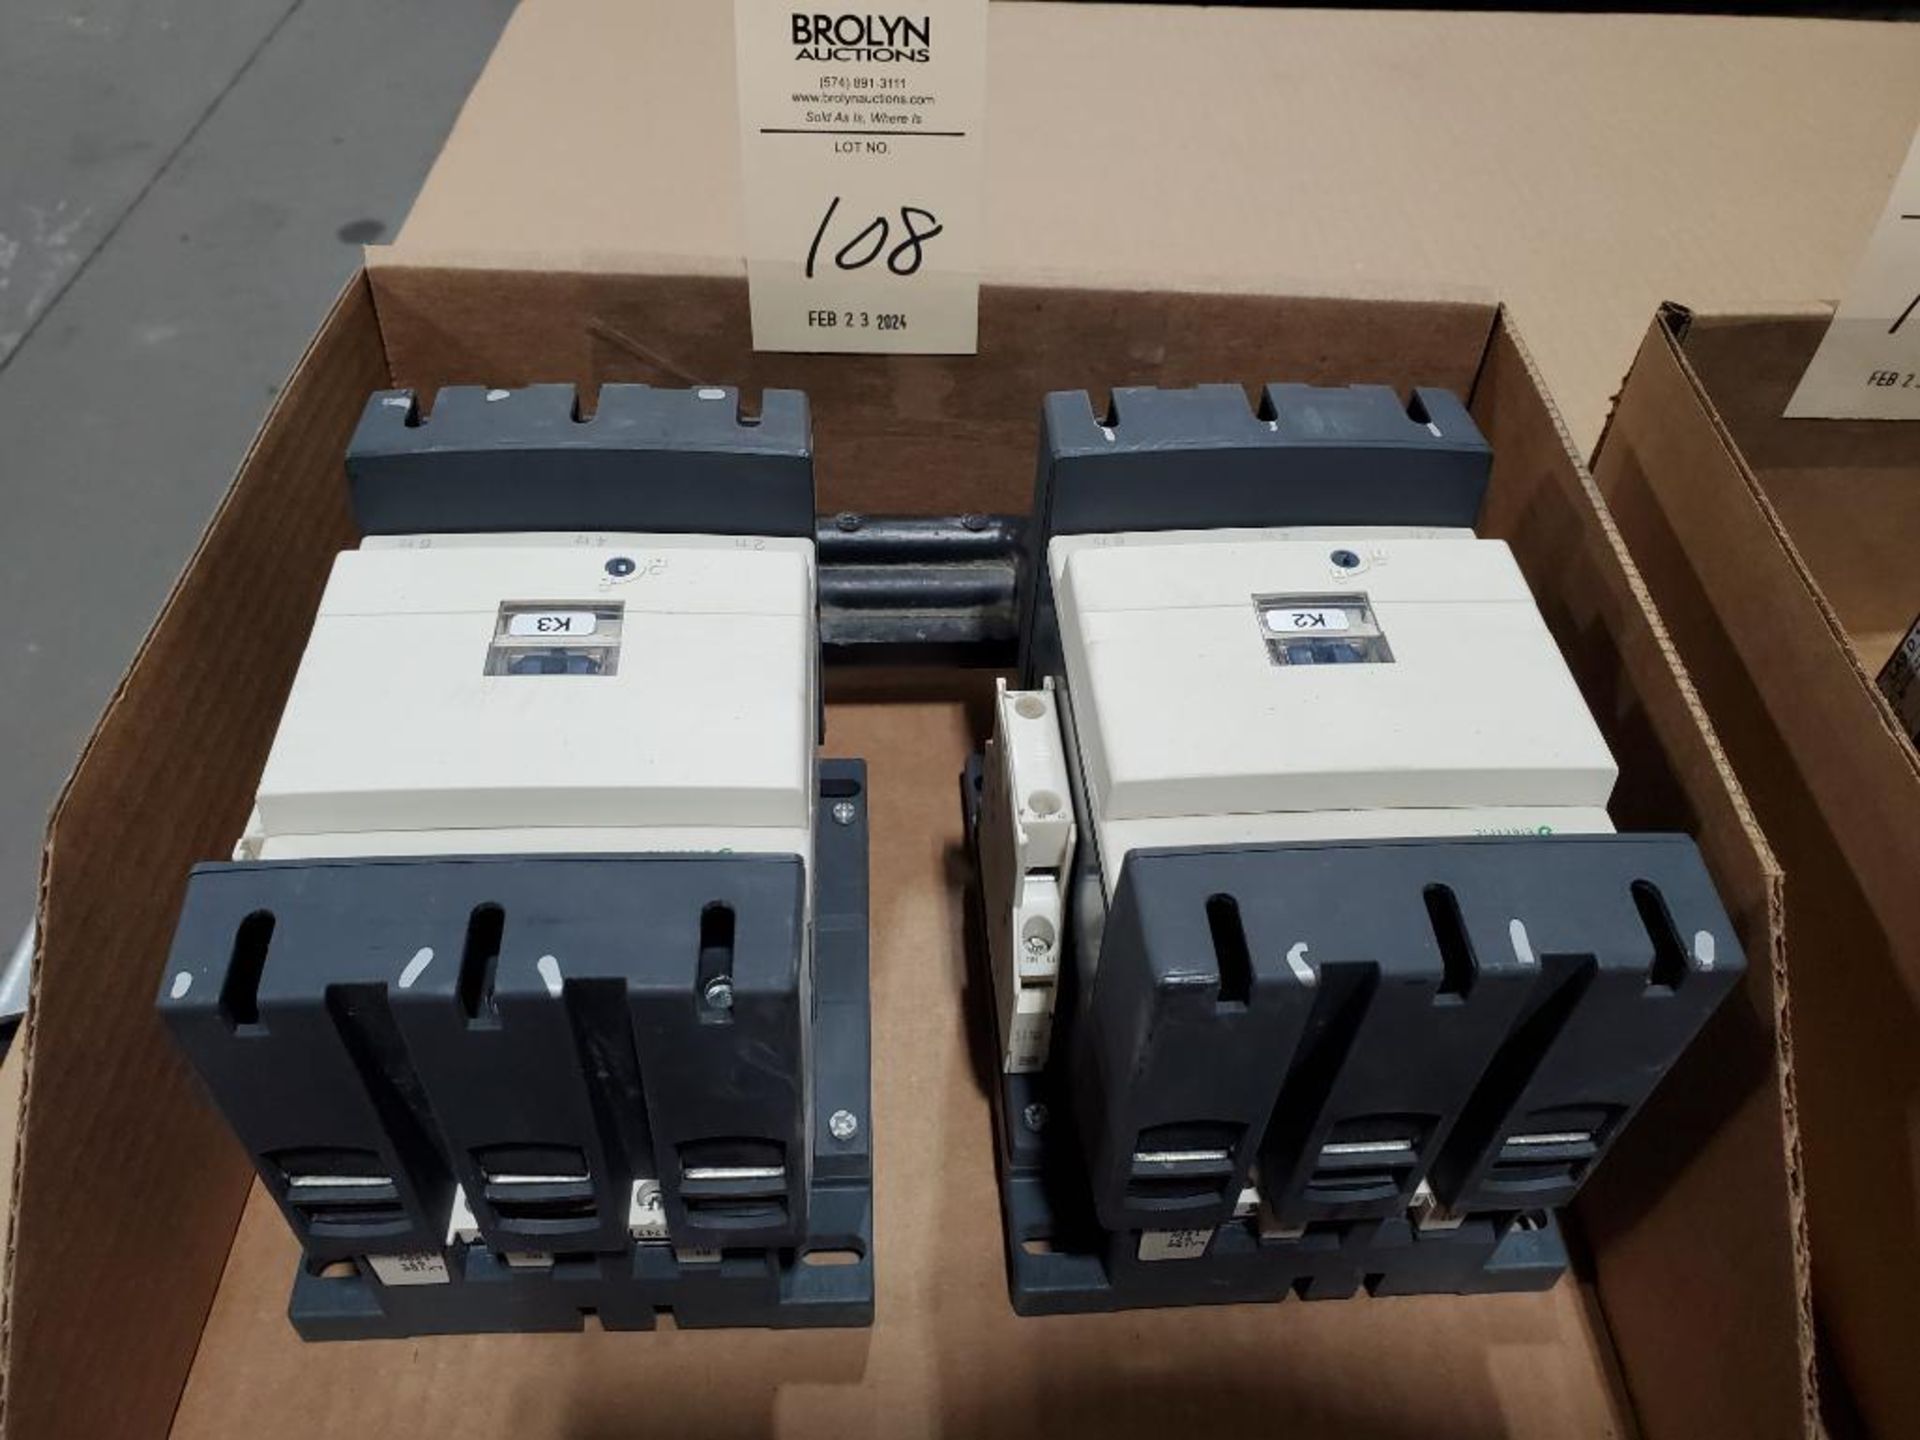 Qty 2 - Schneider Electric contactor. Part number LC1D115.